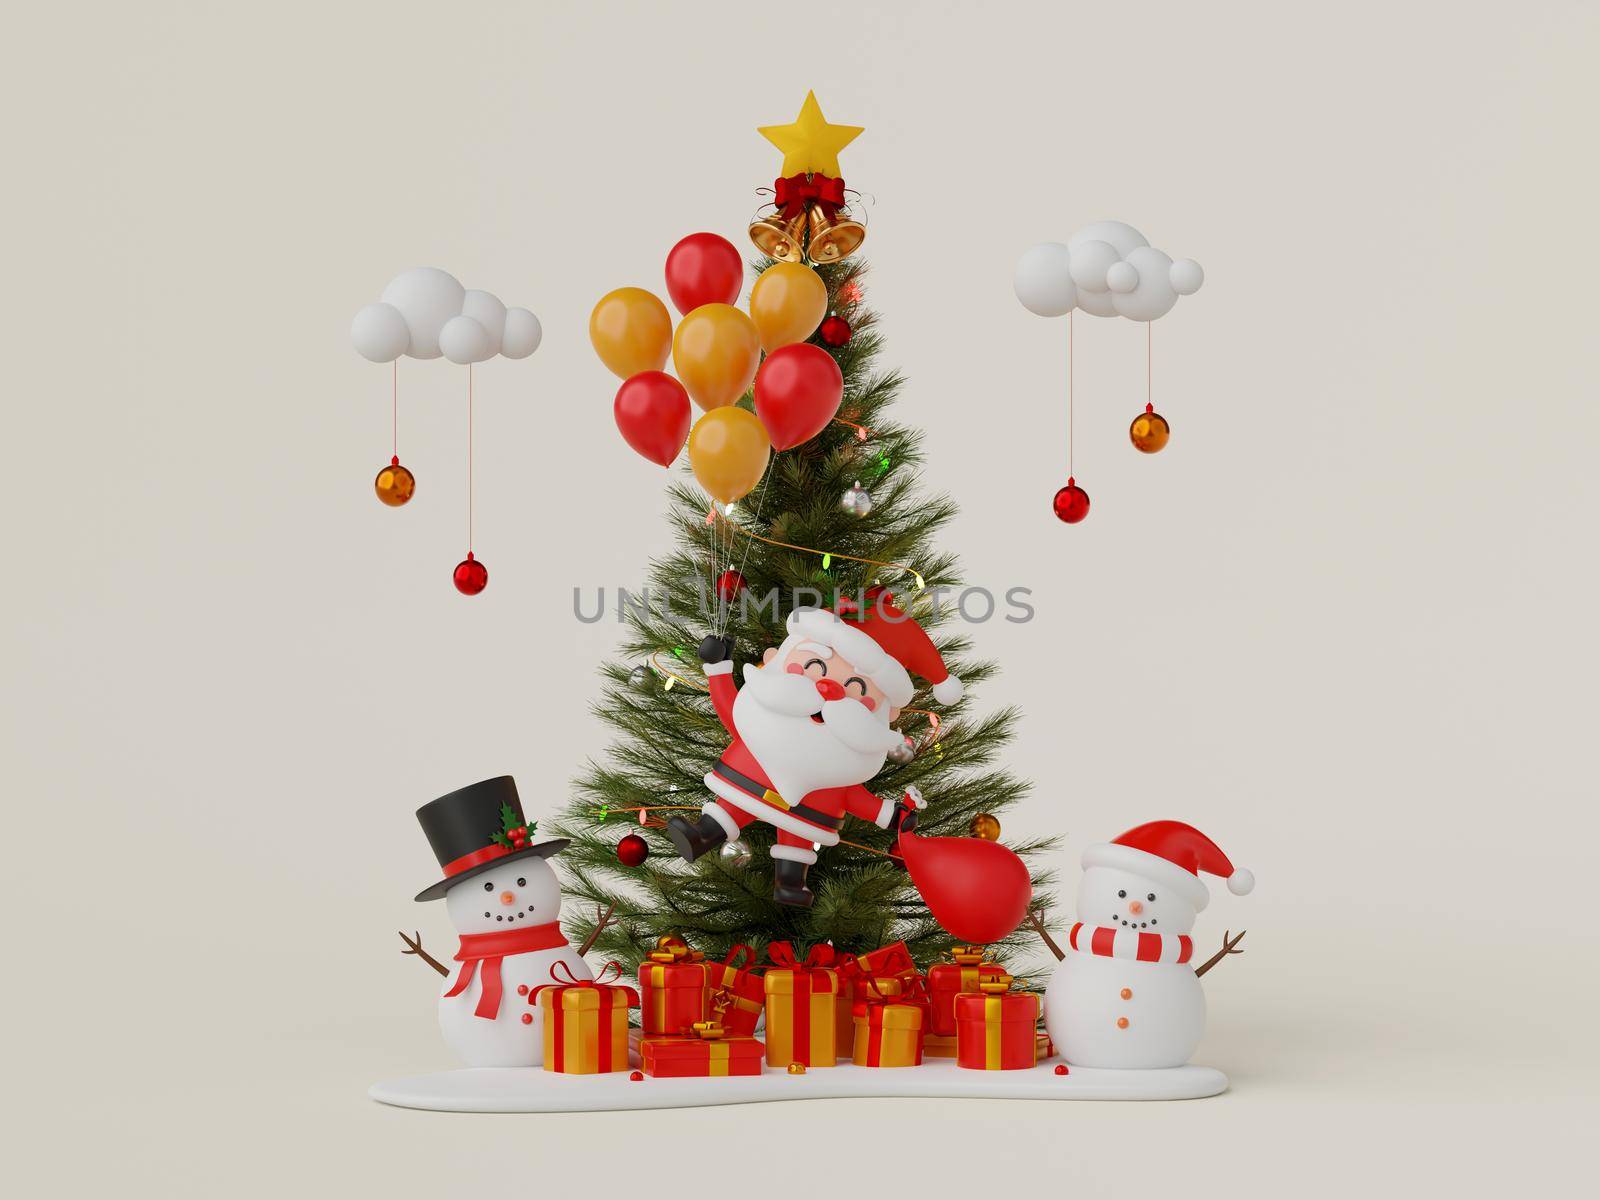 Christmas 3d illustration of Santa Claus and snowman with Christmas tree and gift box